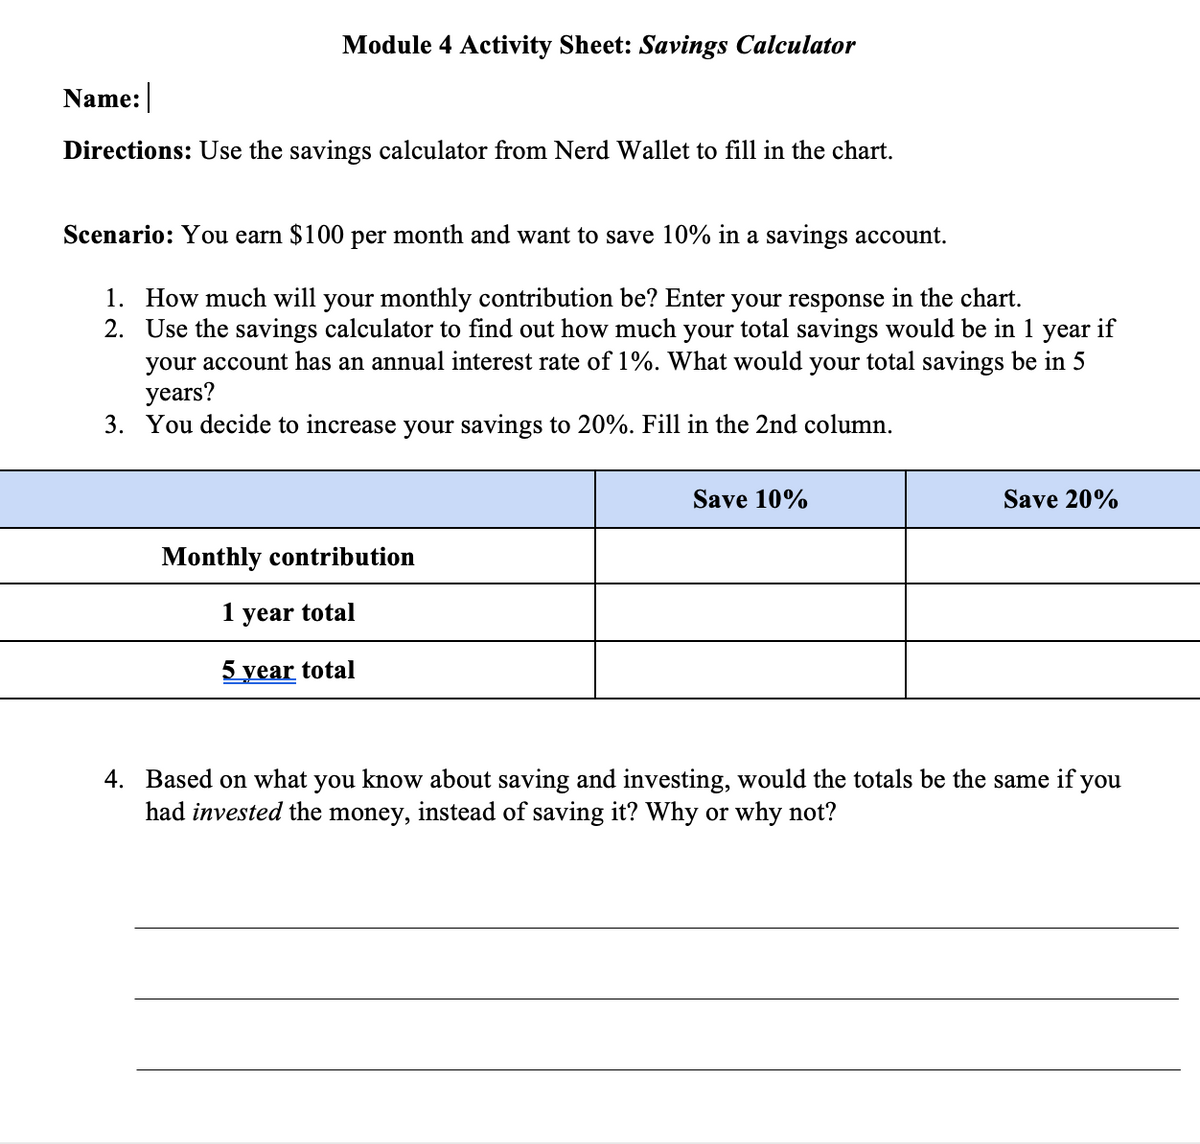 Module 4 Activity Sheet: Savings Calculator
Name:
Directions: Use the savings calculator from Nerd Wallet to fill in the chart.
Scenario: You earn $100 per month and want to save 10% in a savings account.
1. How much will your monthly contribution be? Enter your response in the chart.
2. Use the savings calculator to find out how much your total savings would be in 1 year if
your account has an annual interest rate of 1%. What would your total savings be in 5
years?
3. You decide to increase your savings to 20%. Fill in the 2nd column.
Save 10%
Save 20%
Monthly contribution
1 year total
5 year total
4. Based on what
you know about saving and investing, would the totals be the same if you
had invested the money, instead of saving it? Why or why not?